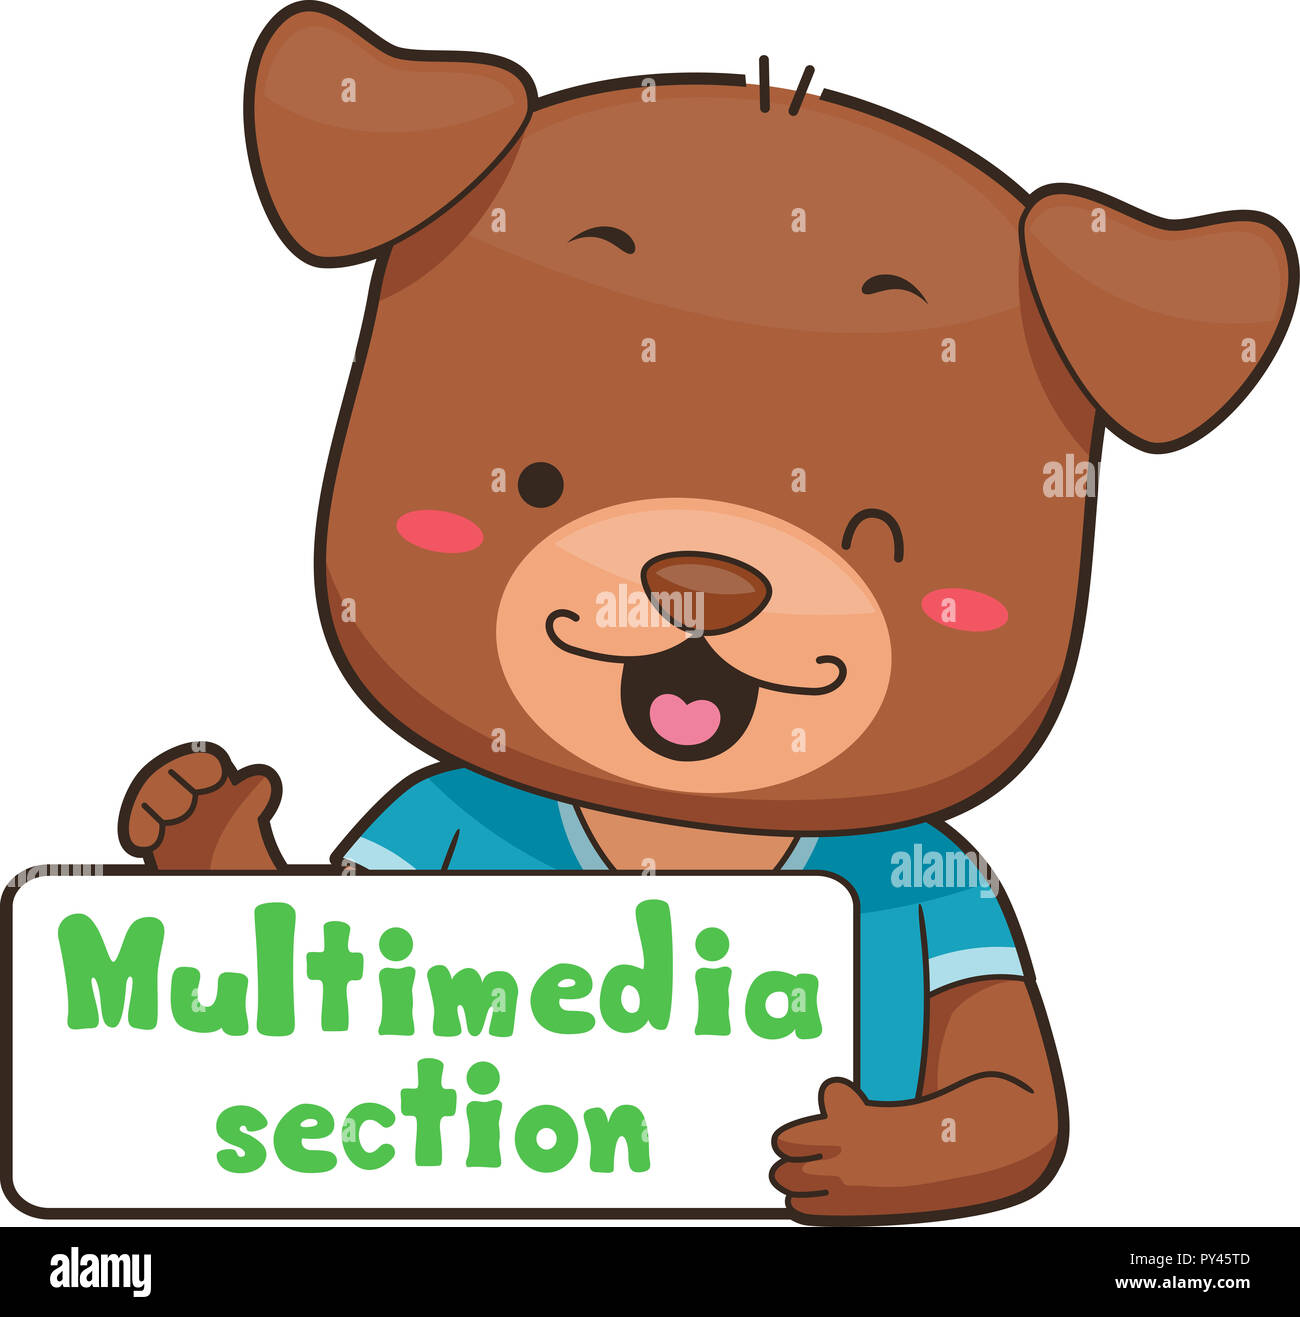 Illustration of a Dog Holding a Multimedia Section as Label for Library Stock Photo